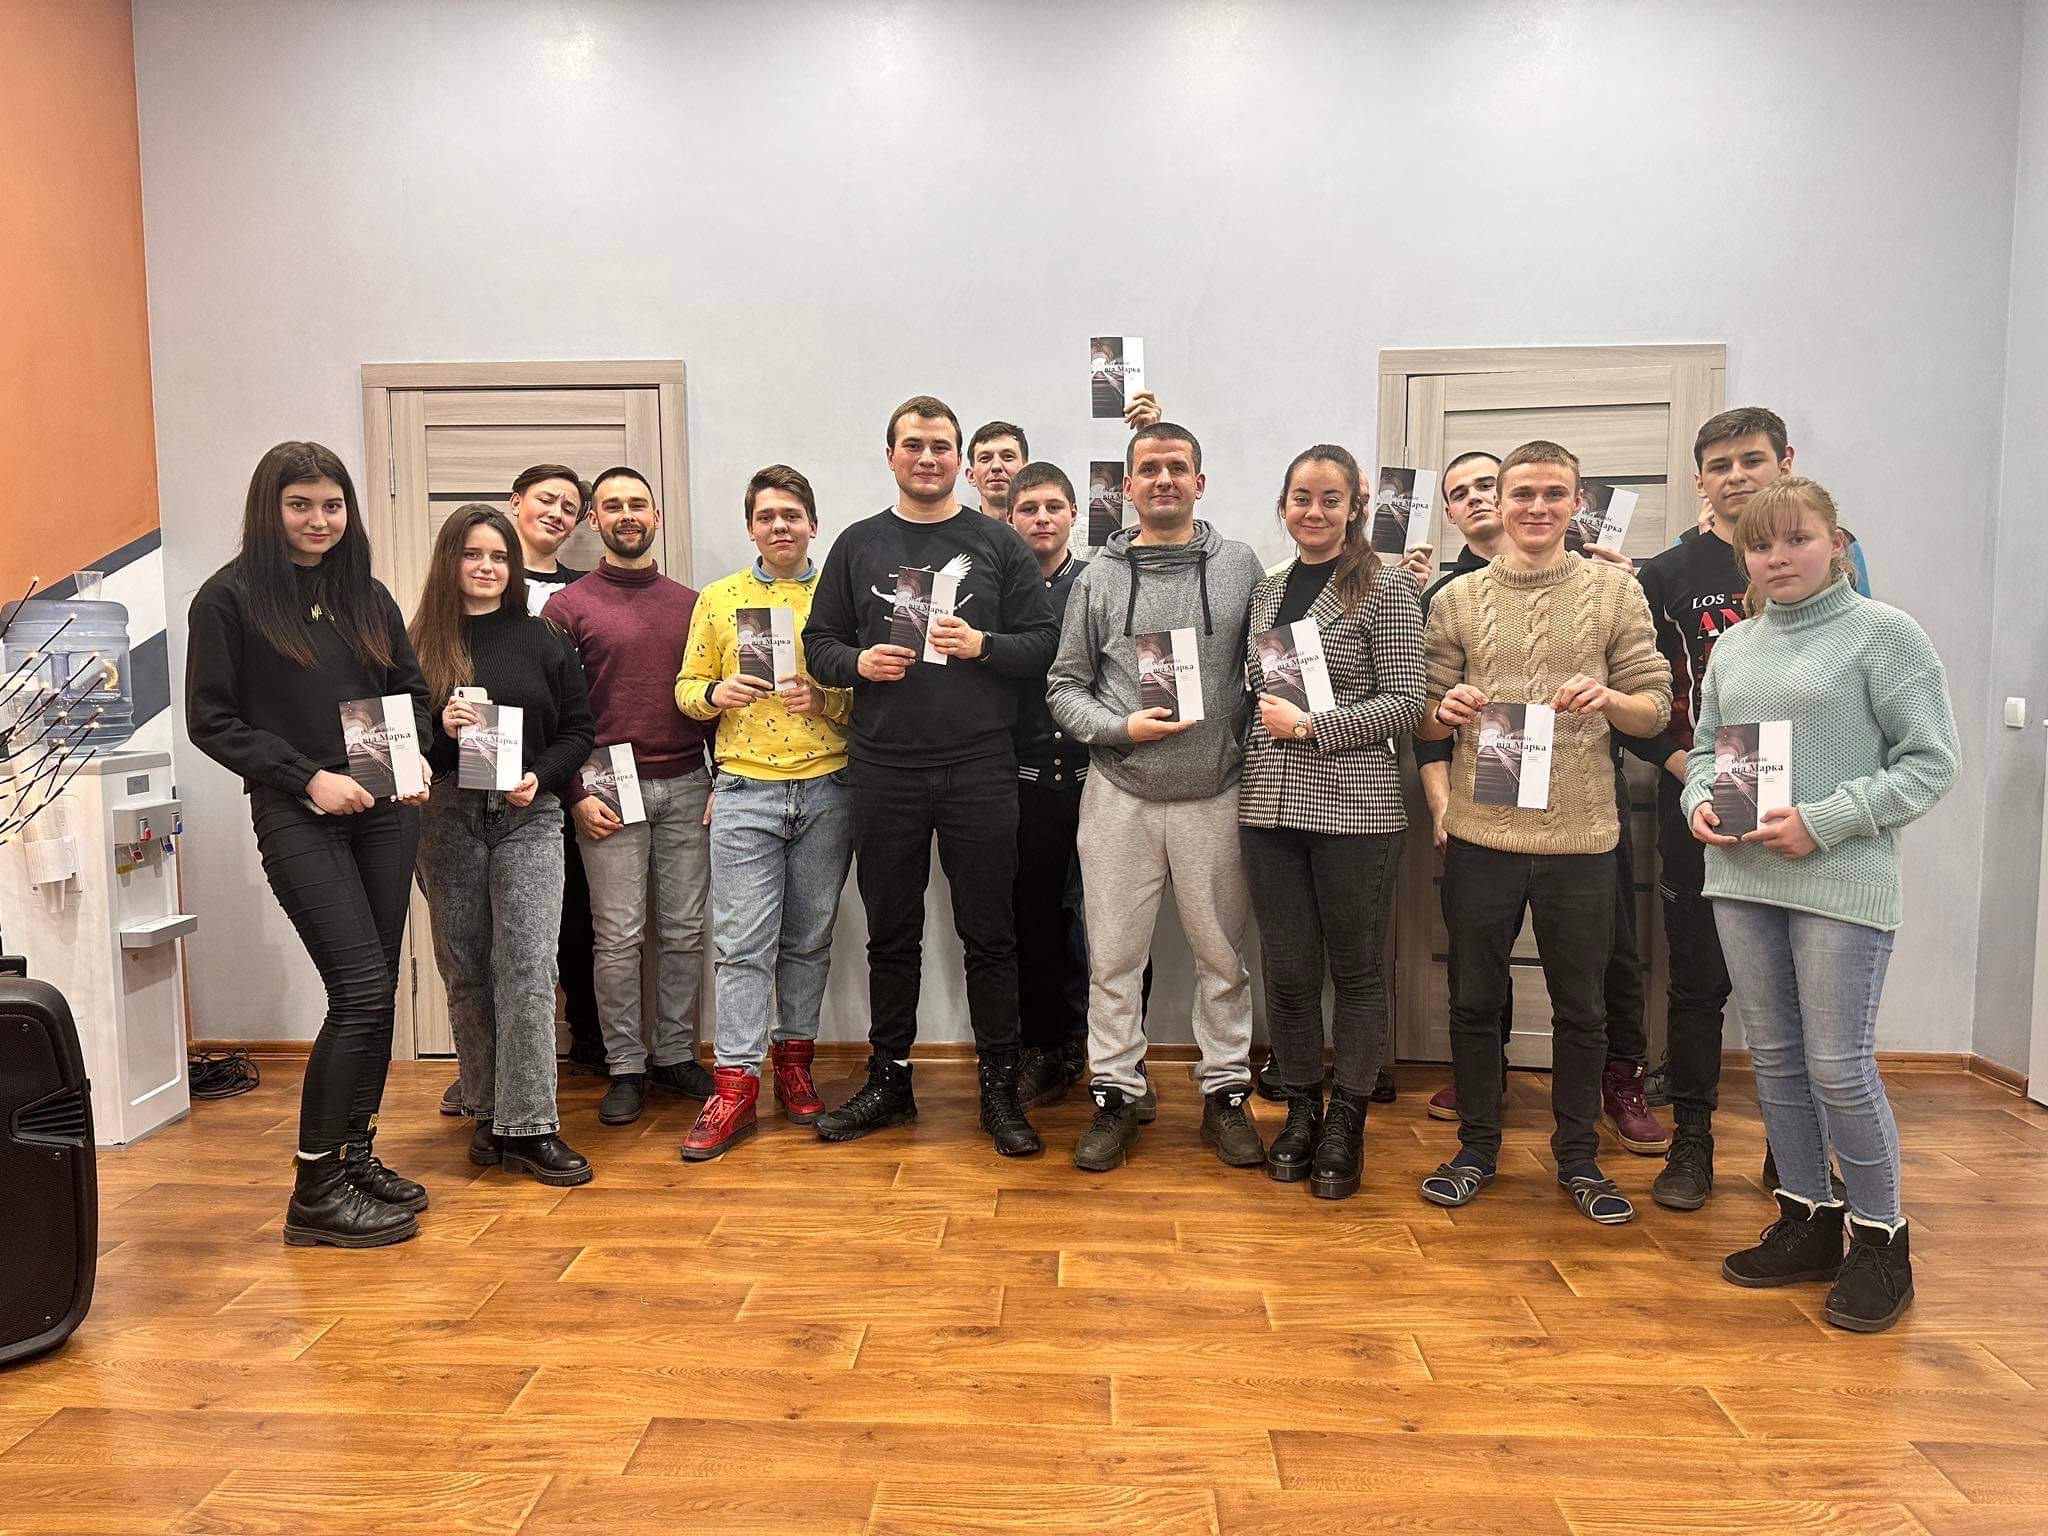 Some of the youth with their new iMark Bibles from Biblica